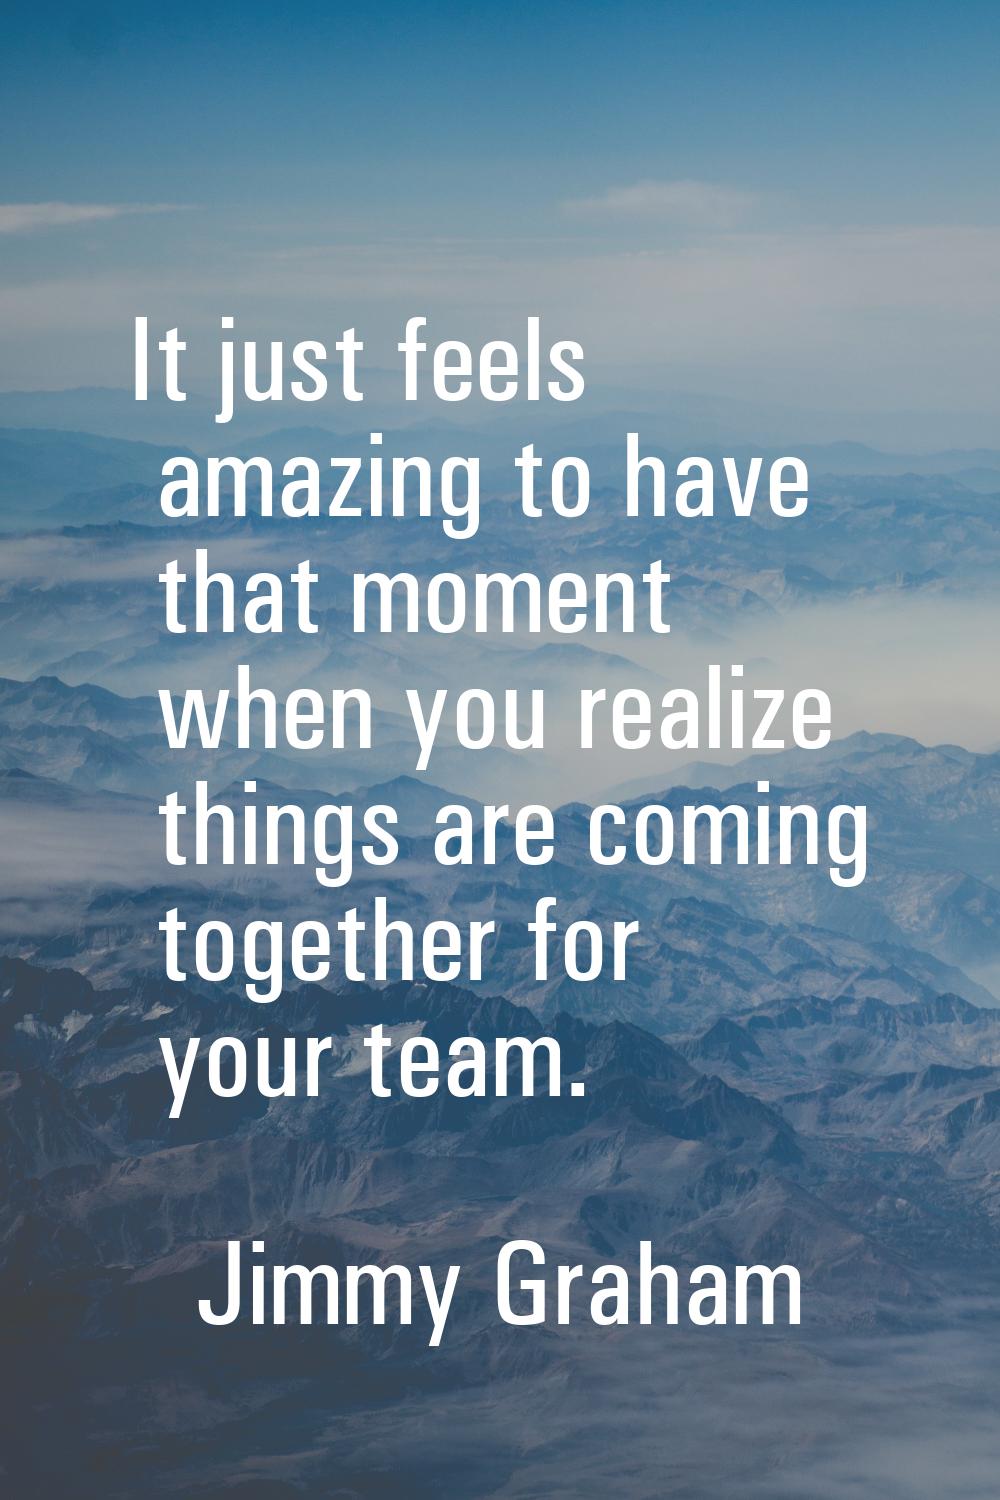 It just feels amazing to have that moment when you realize things are coming together for your team